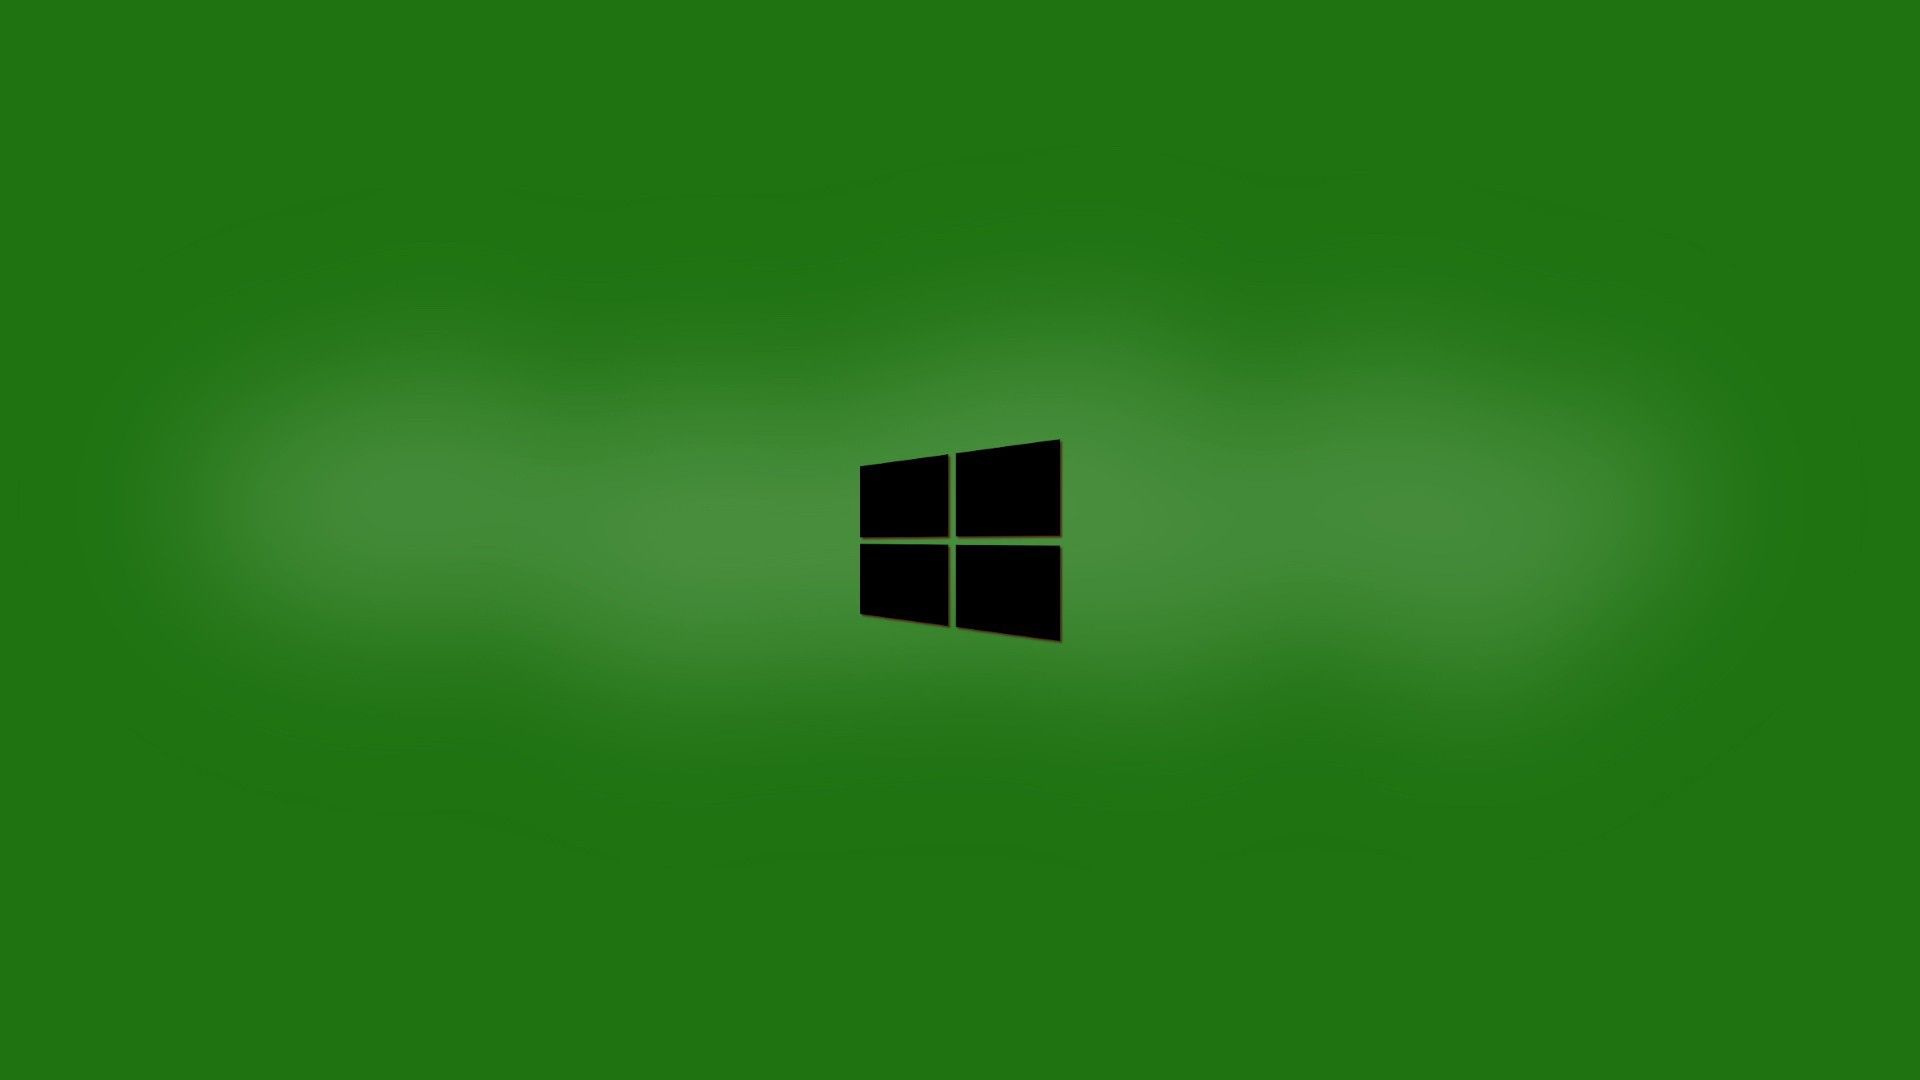 Windows-8 HD 1080p Wallpapers Download | HD Wallpapers Source